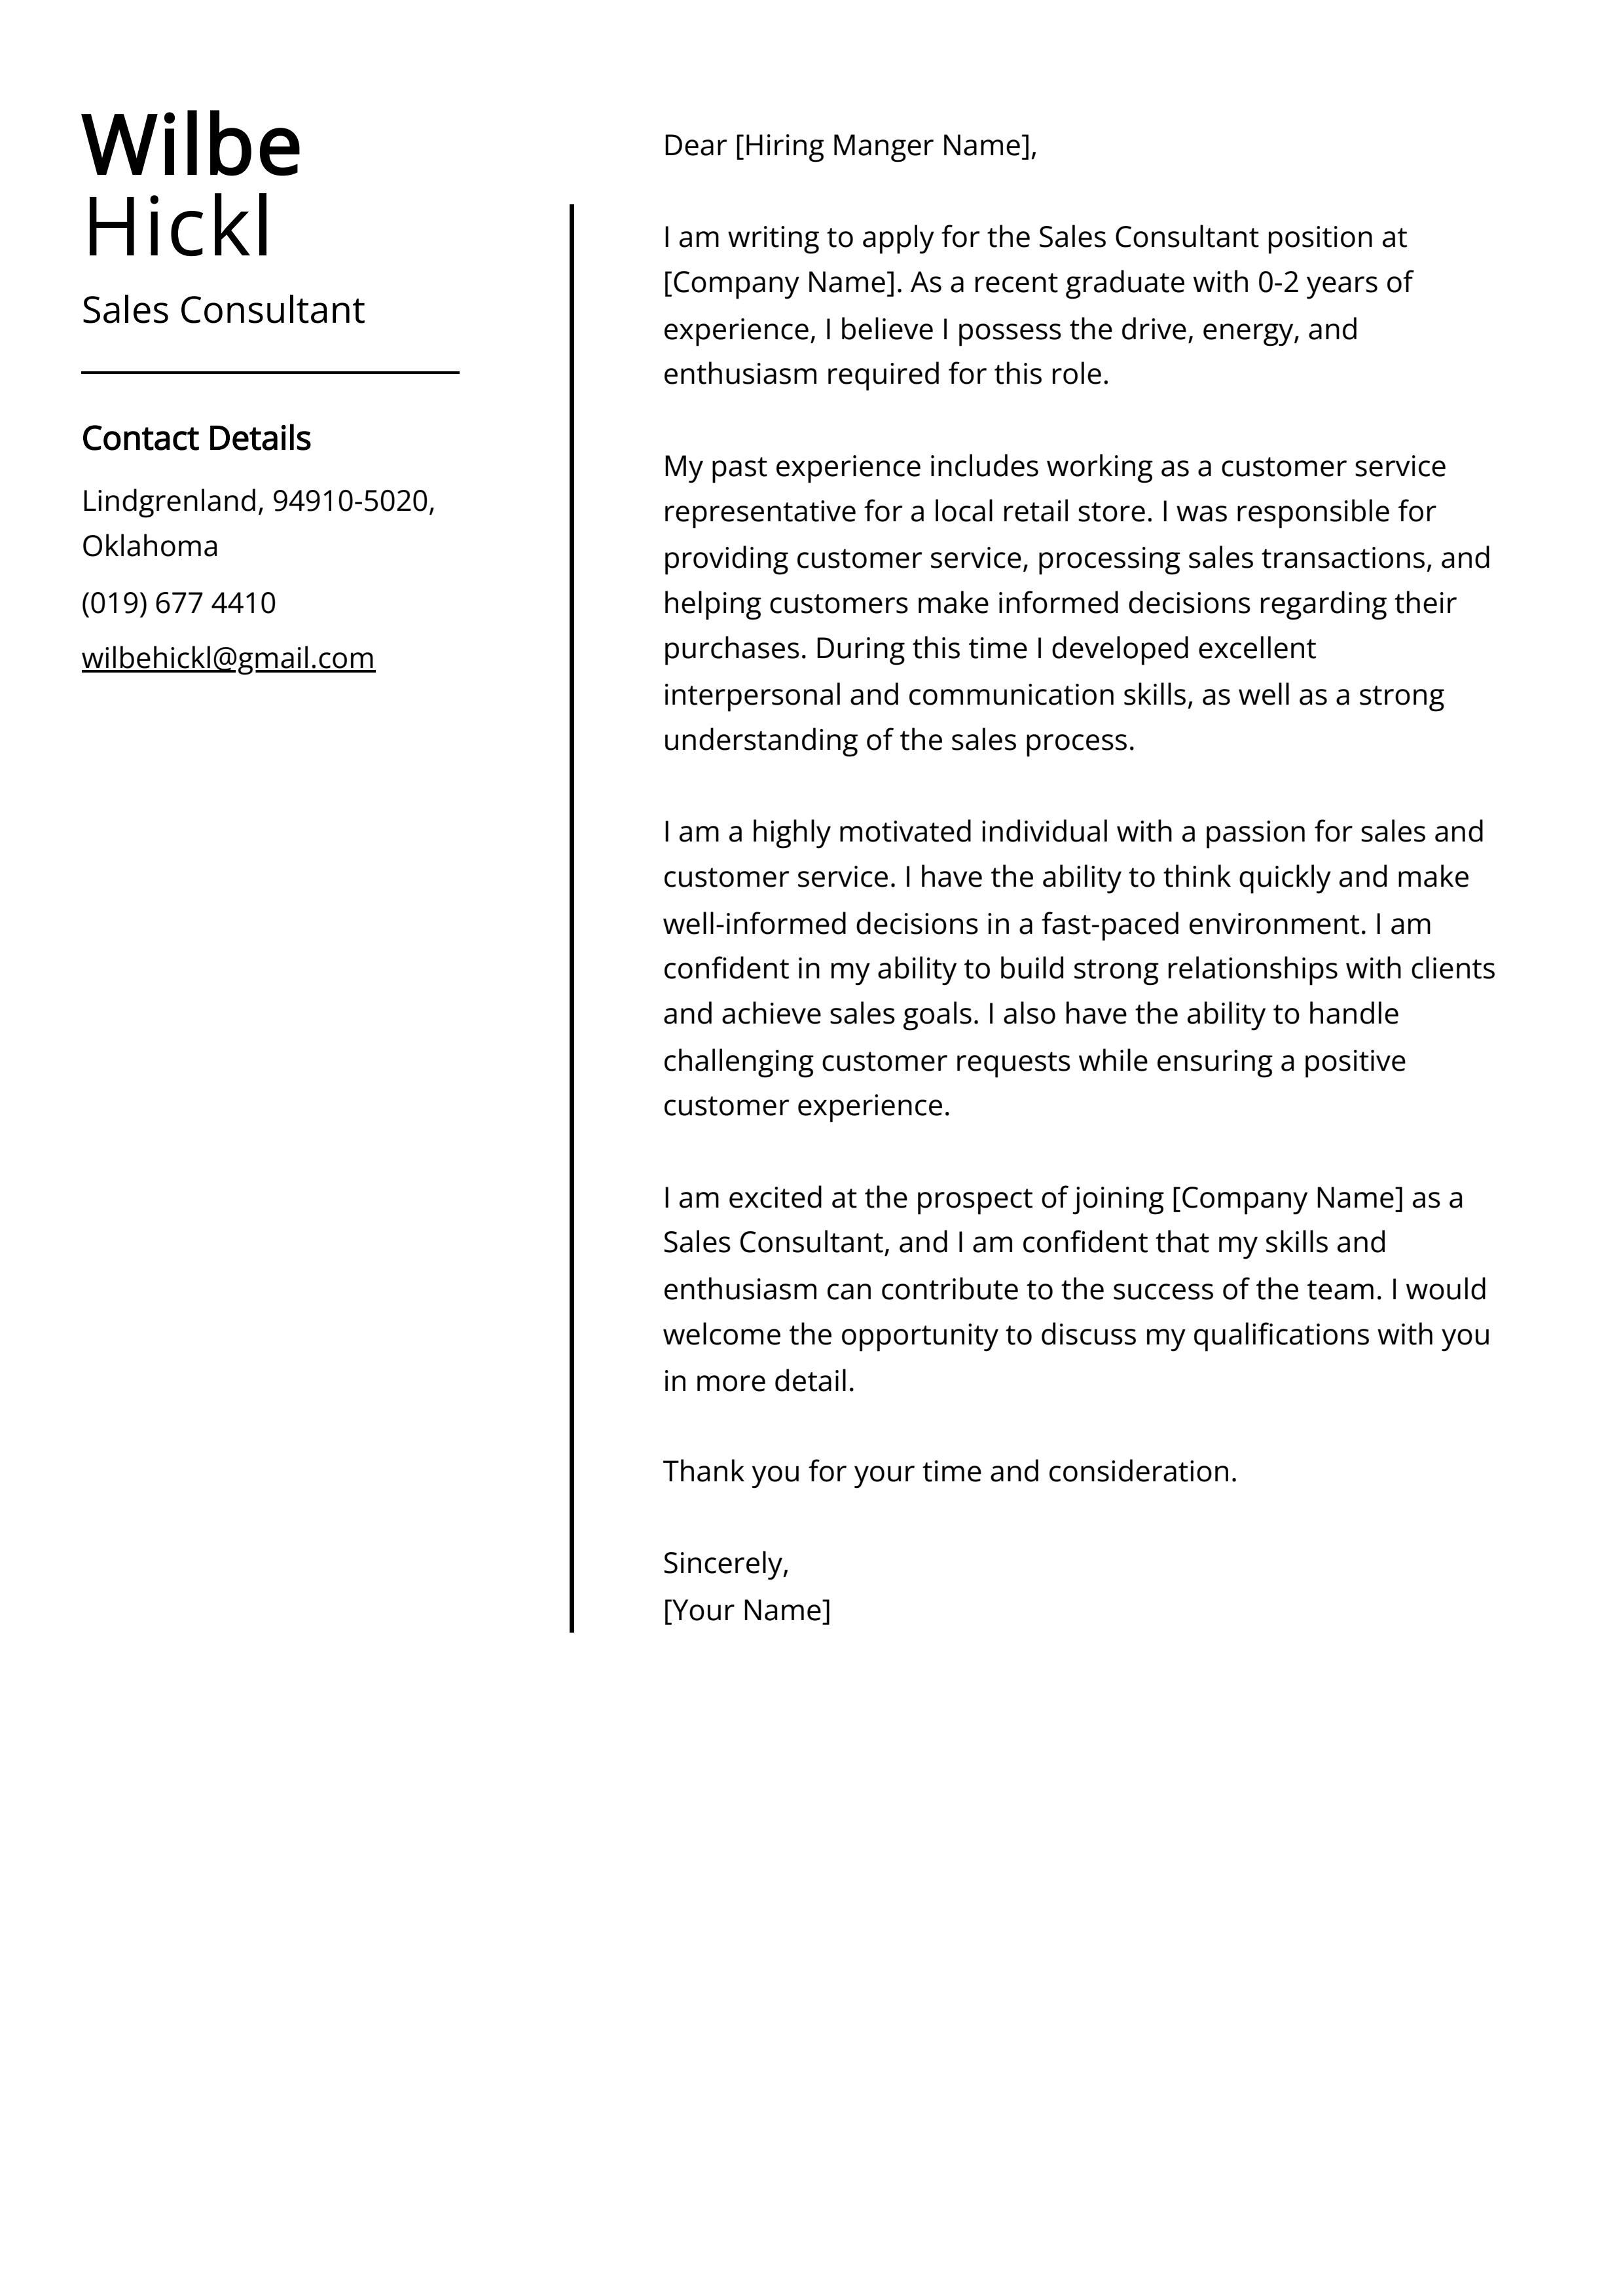 Sales Consultant Cover Letter Example